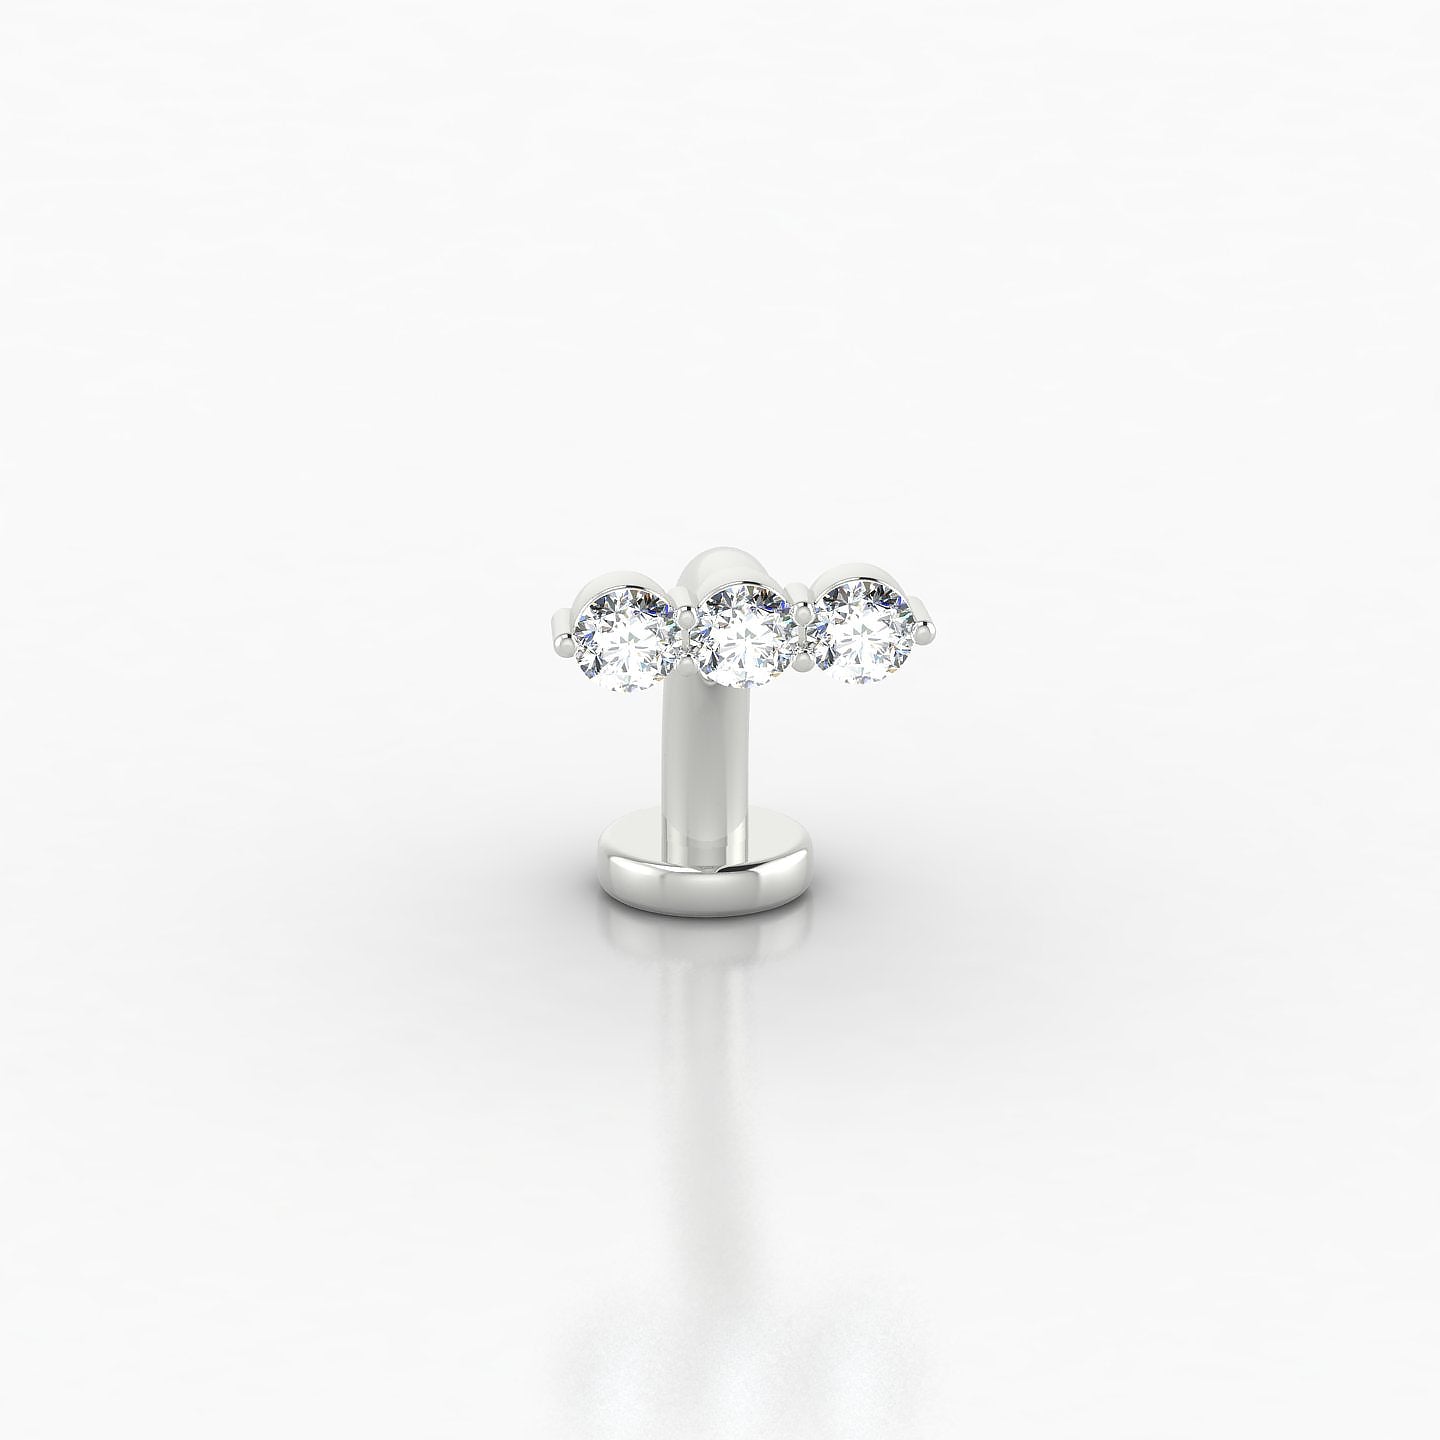 Ma'at | 18k White Gold 10 mm 7.5 mm Trilogy Diamond Floating Navel Piercing